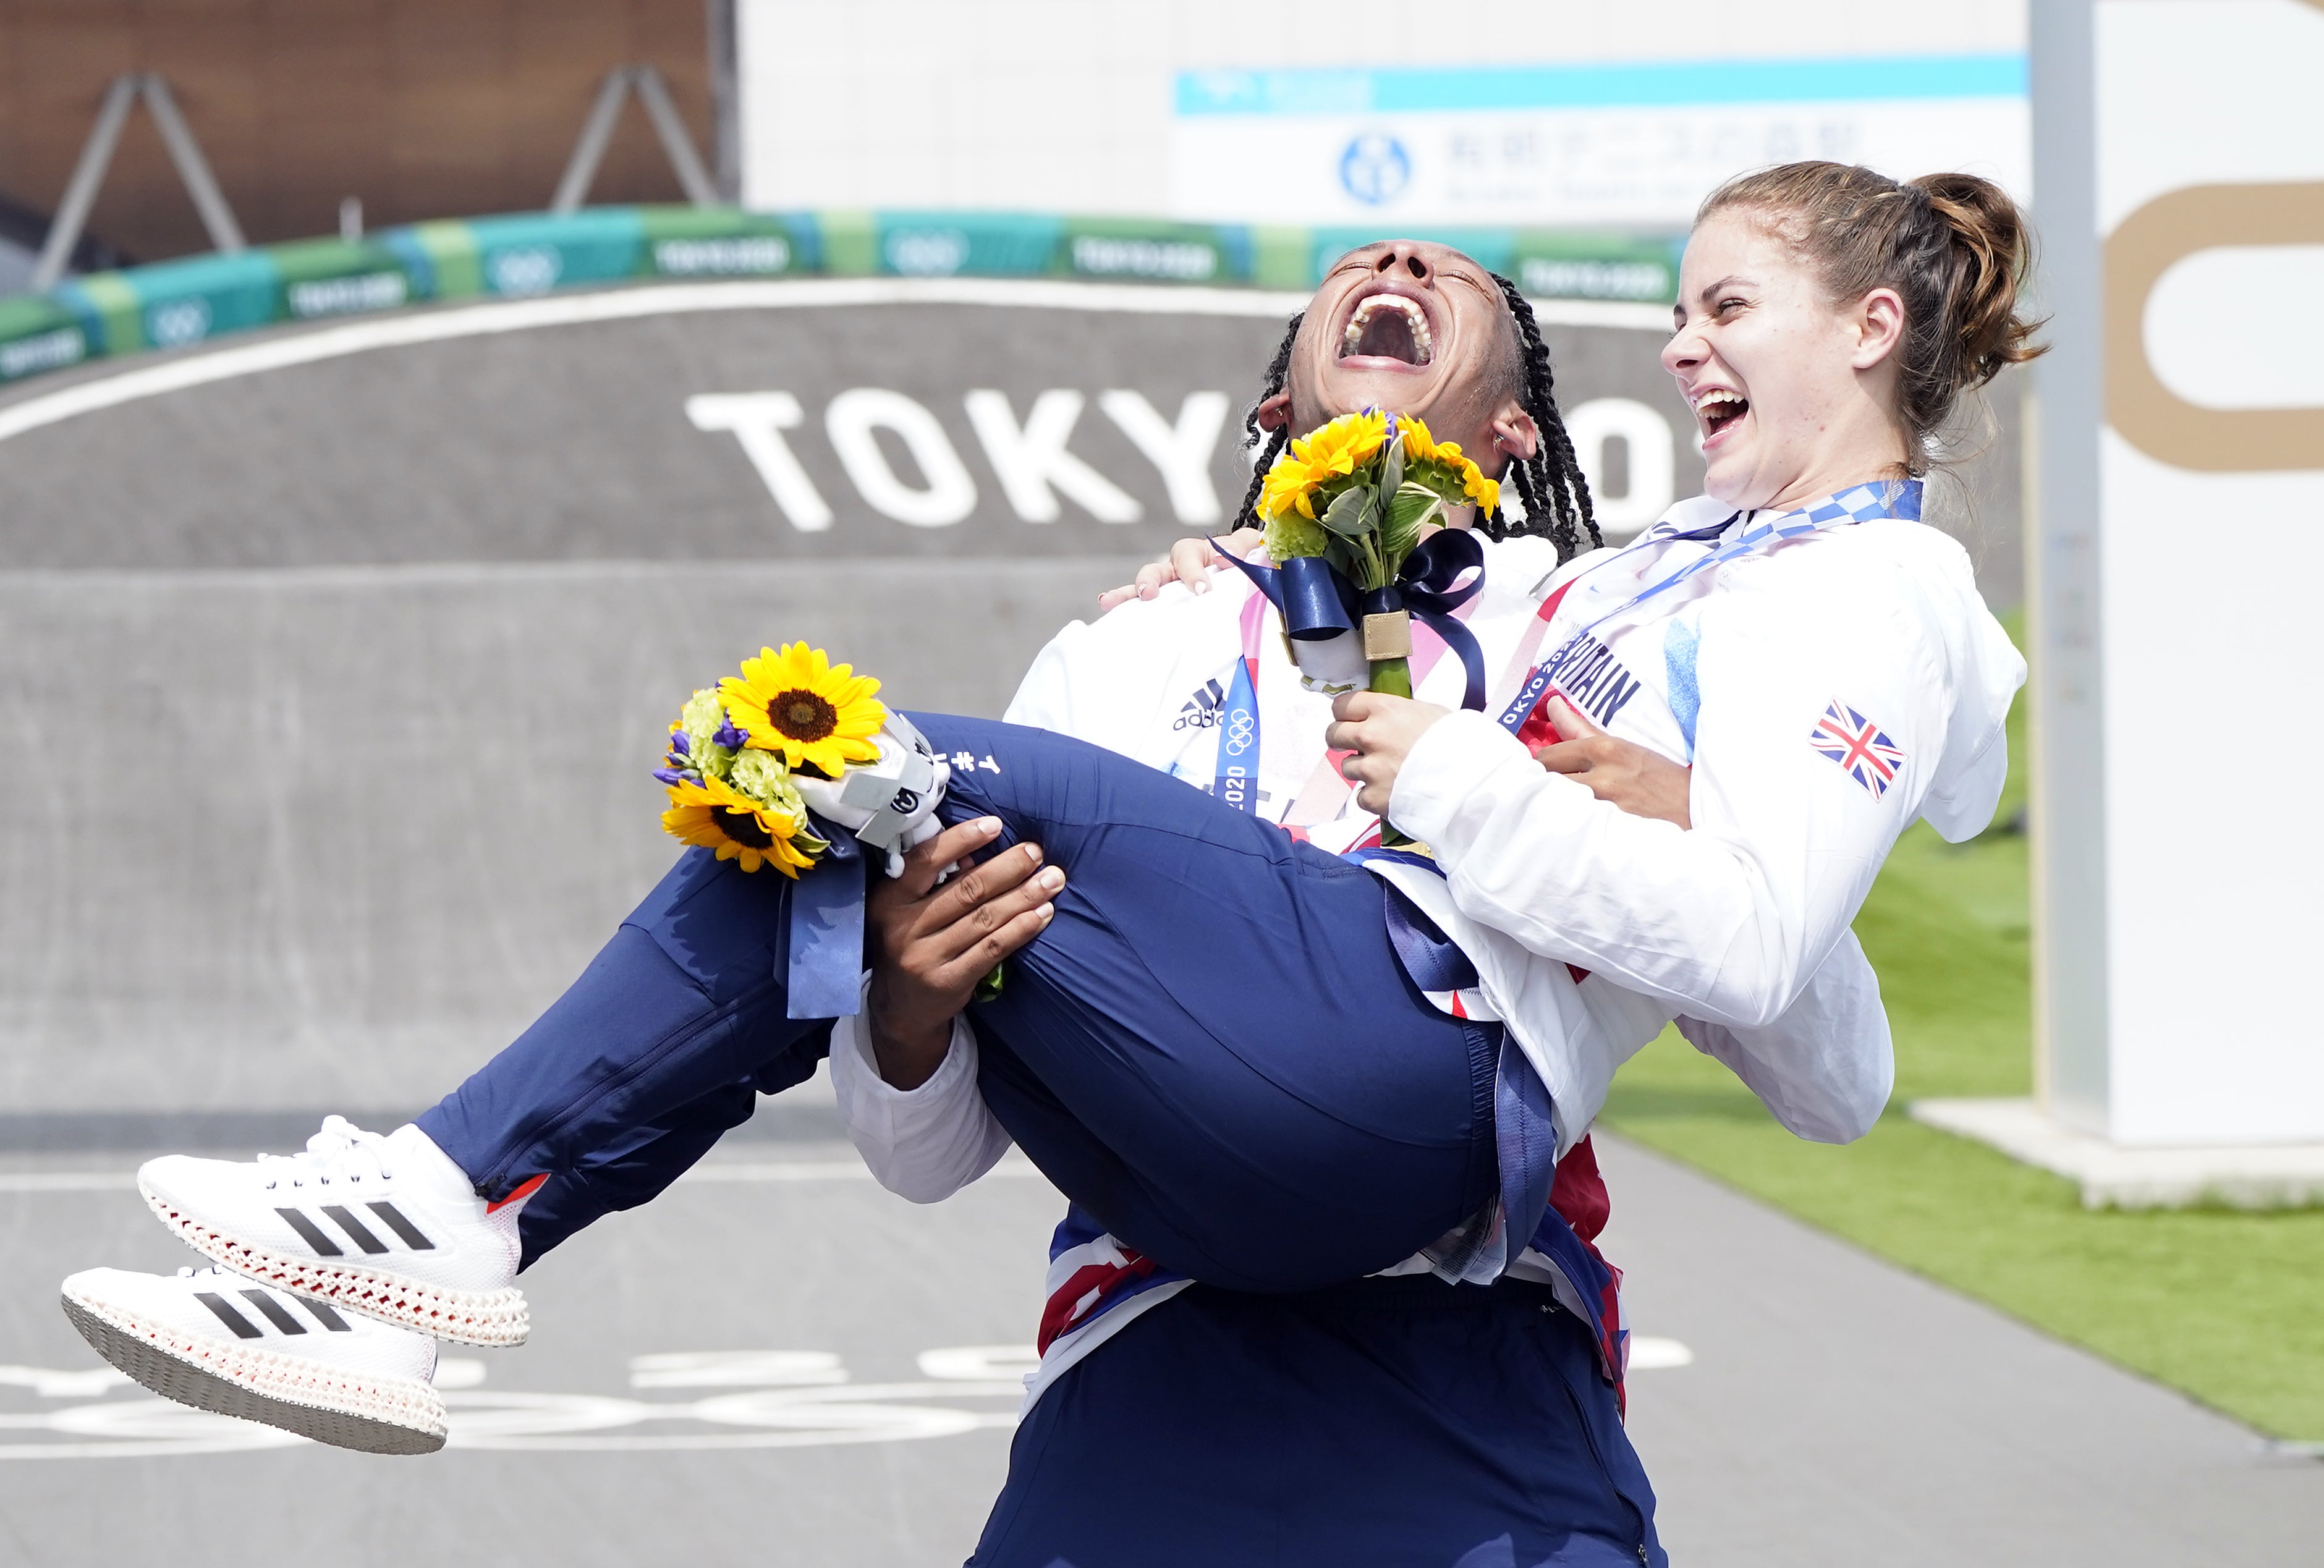 Beth Shriever is held aloft by team-mate Kye Whyte after her victory at the Tokyo Olympics (Danny Lawson/PA)